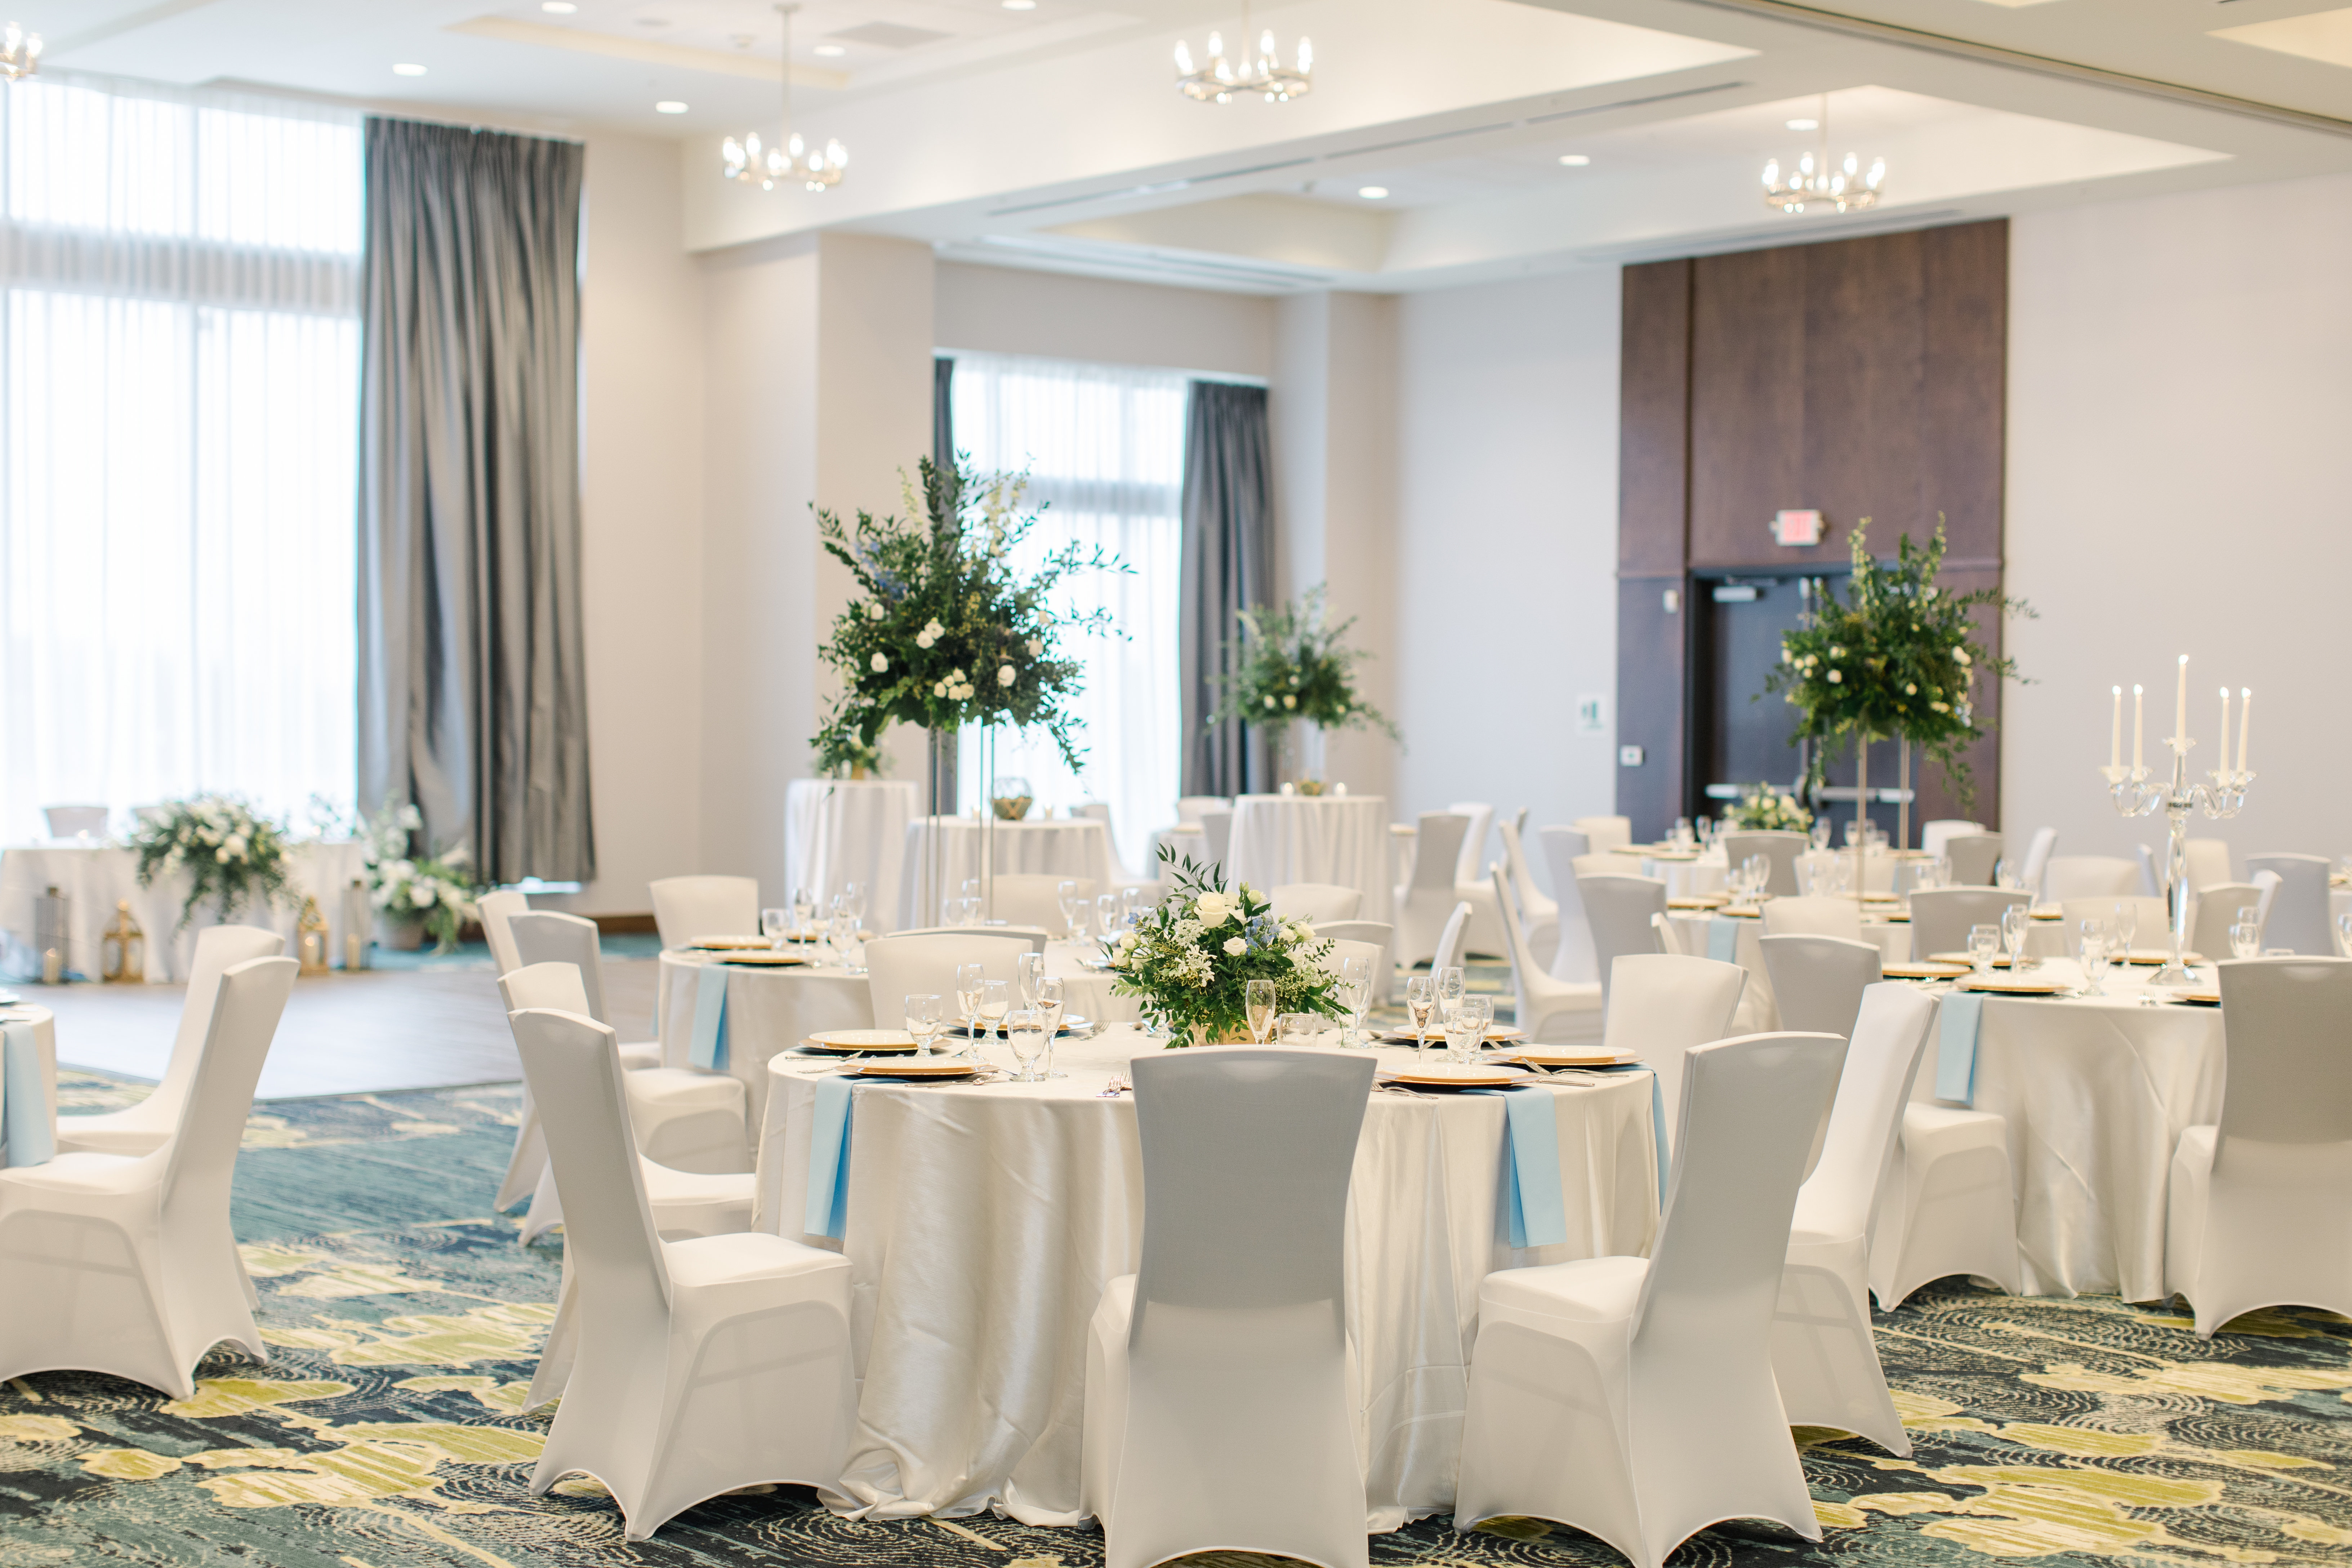 Special occasions are well celebrated in our event spaces.